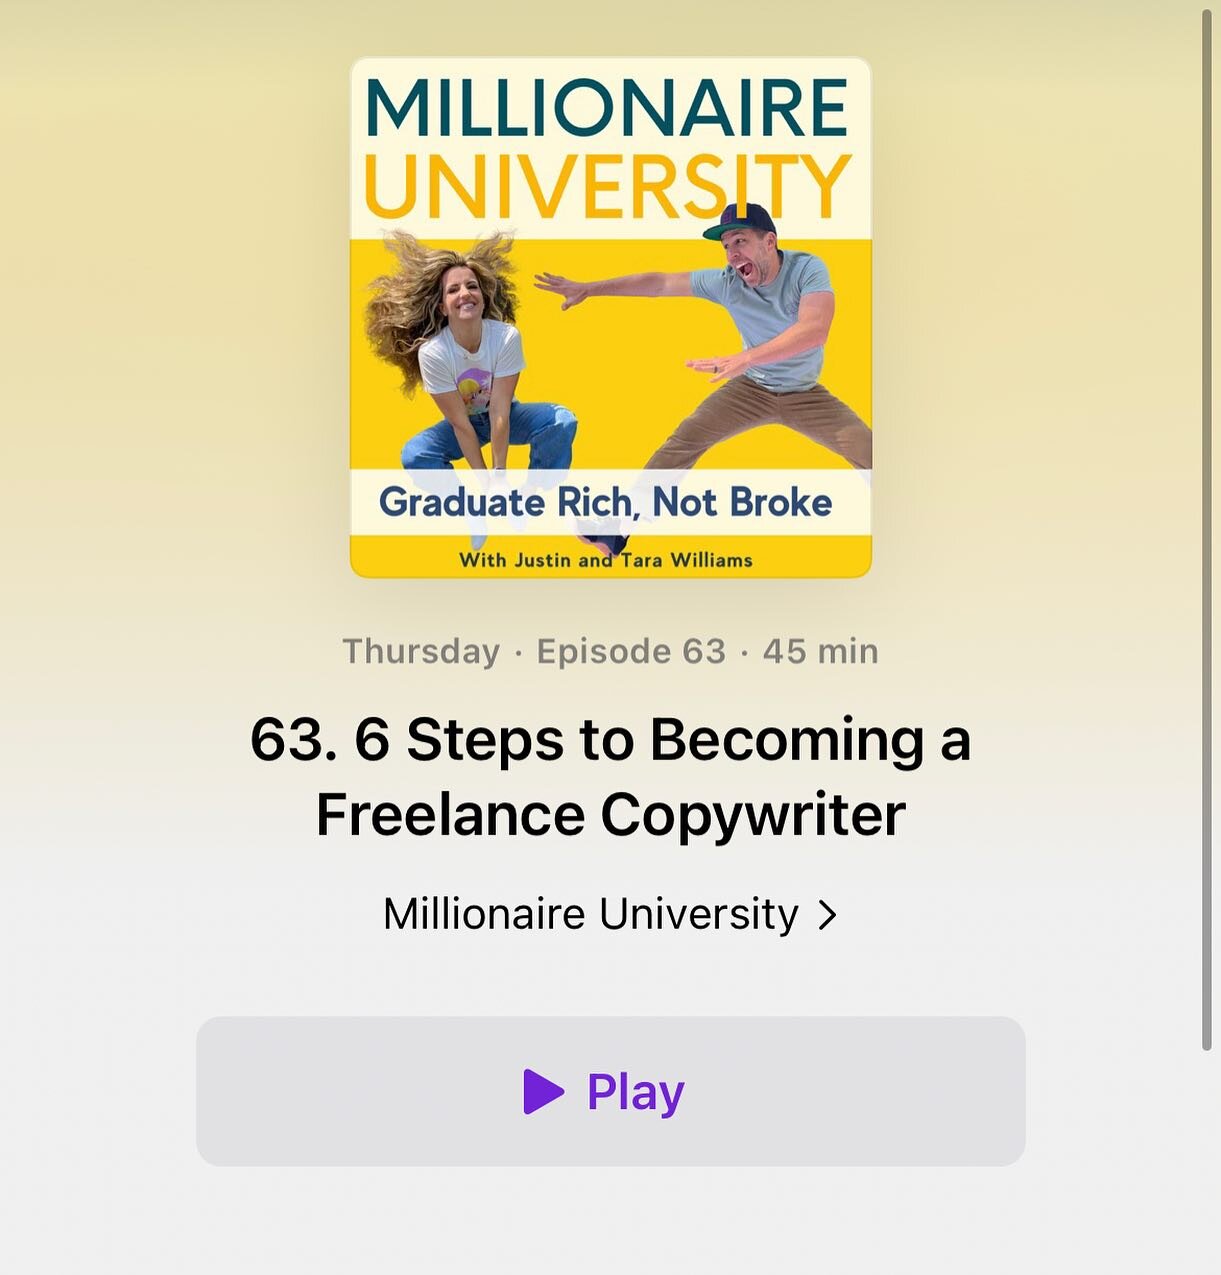 Ever wondered how to start your own copywriting business? The fine folks at the Millionaire University podcast asked me all about it! 💥

In this episode, host Brien Gearin and I break down the 6 steps to launch your copywriting career. 

So if you w